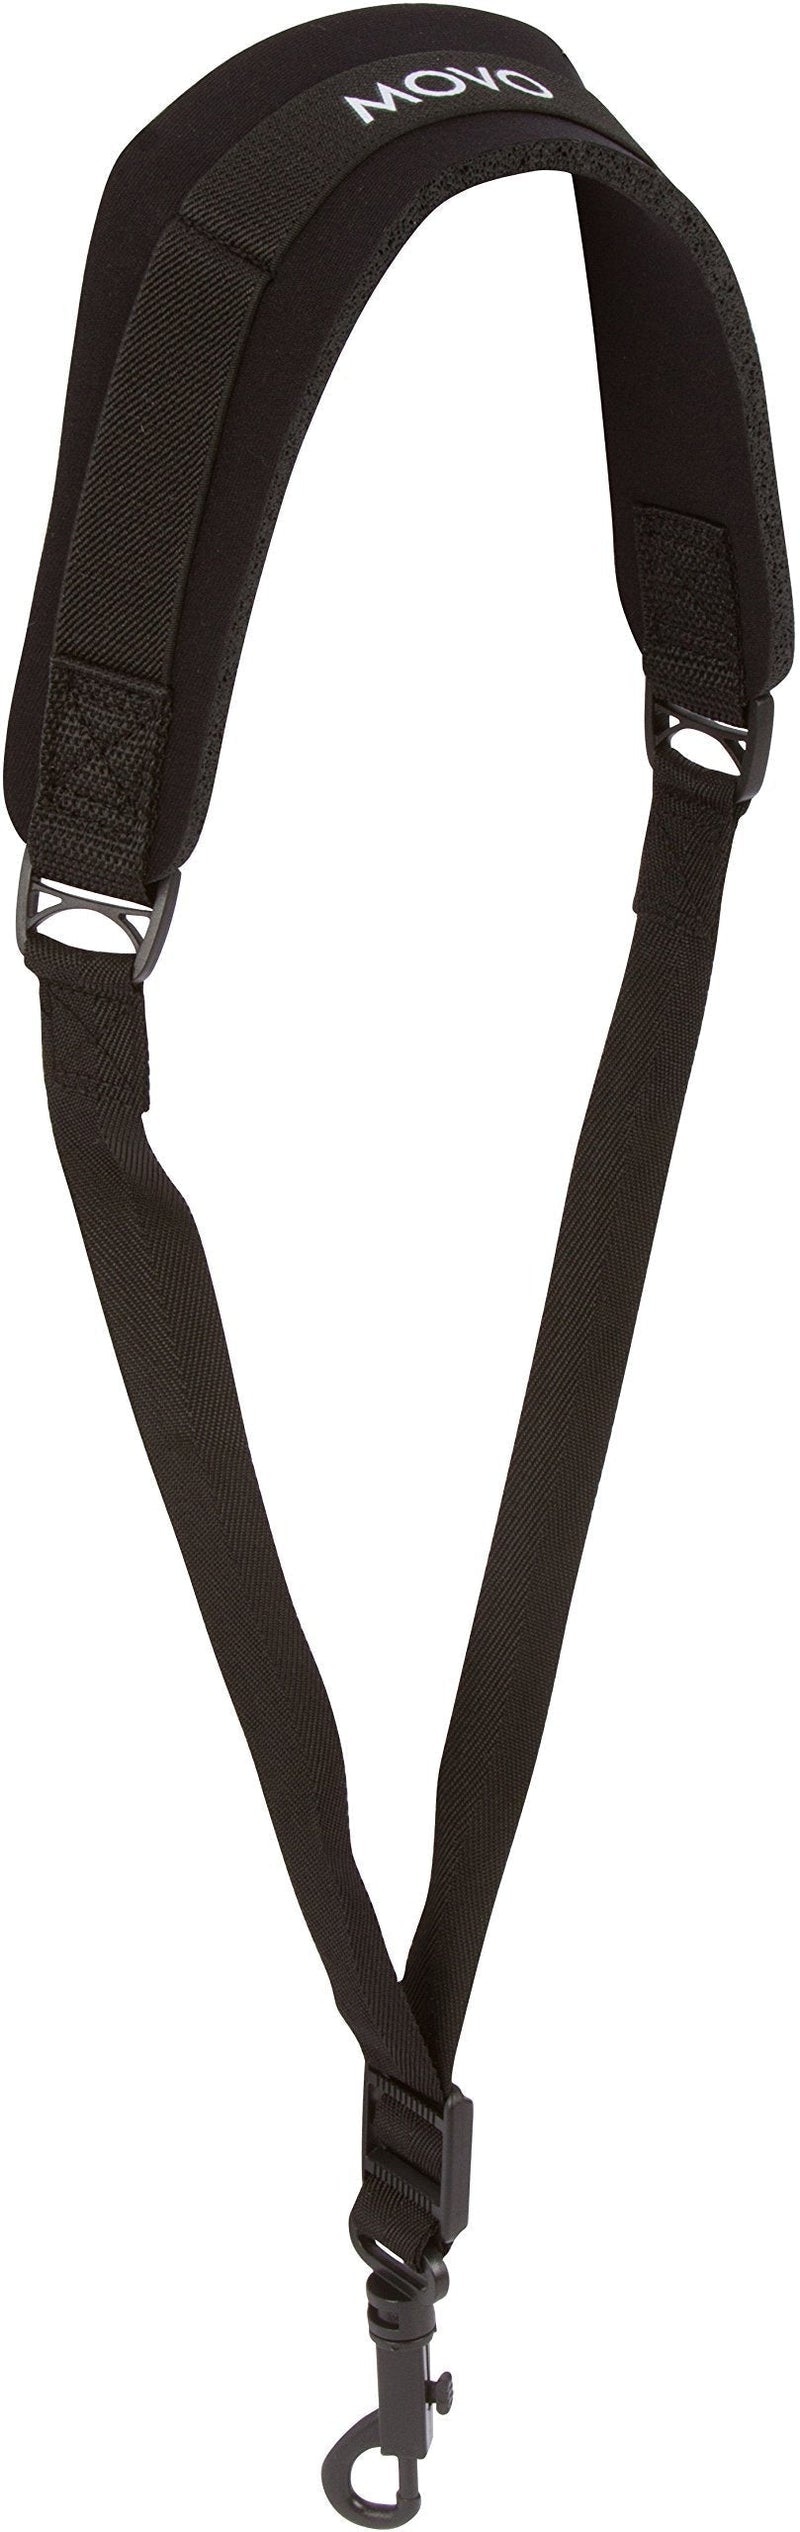 Movo MS-20J Music Instrument Neck Strap for Saxophones, Horns, Bass Clarinets, Bassoons, Oboes and More (Black - Medium Length) Black